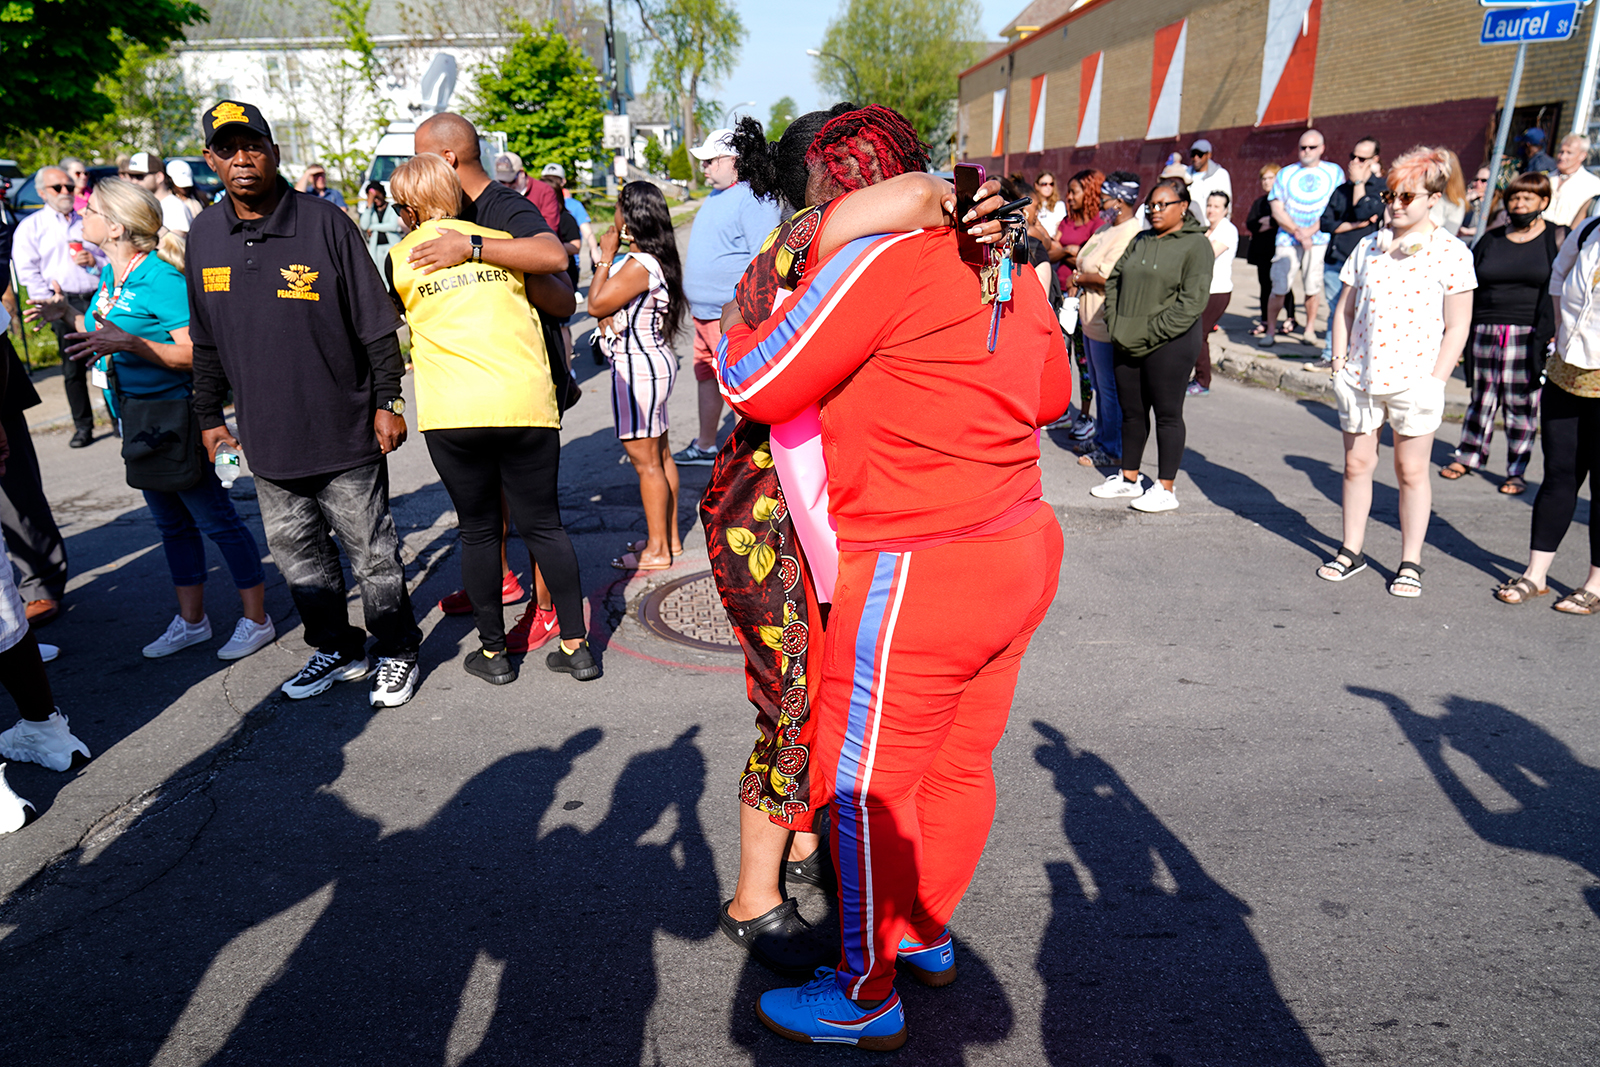 People embrace outside the scene of a shooting at a supermarket in Buffalo, New York, Sunday, May 15, 2022. (AP Photo/Matt Rourke)